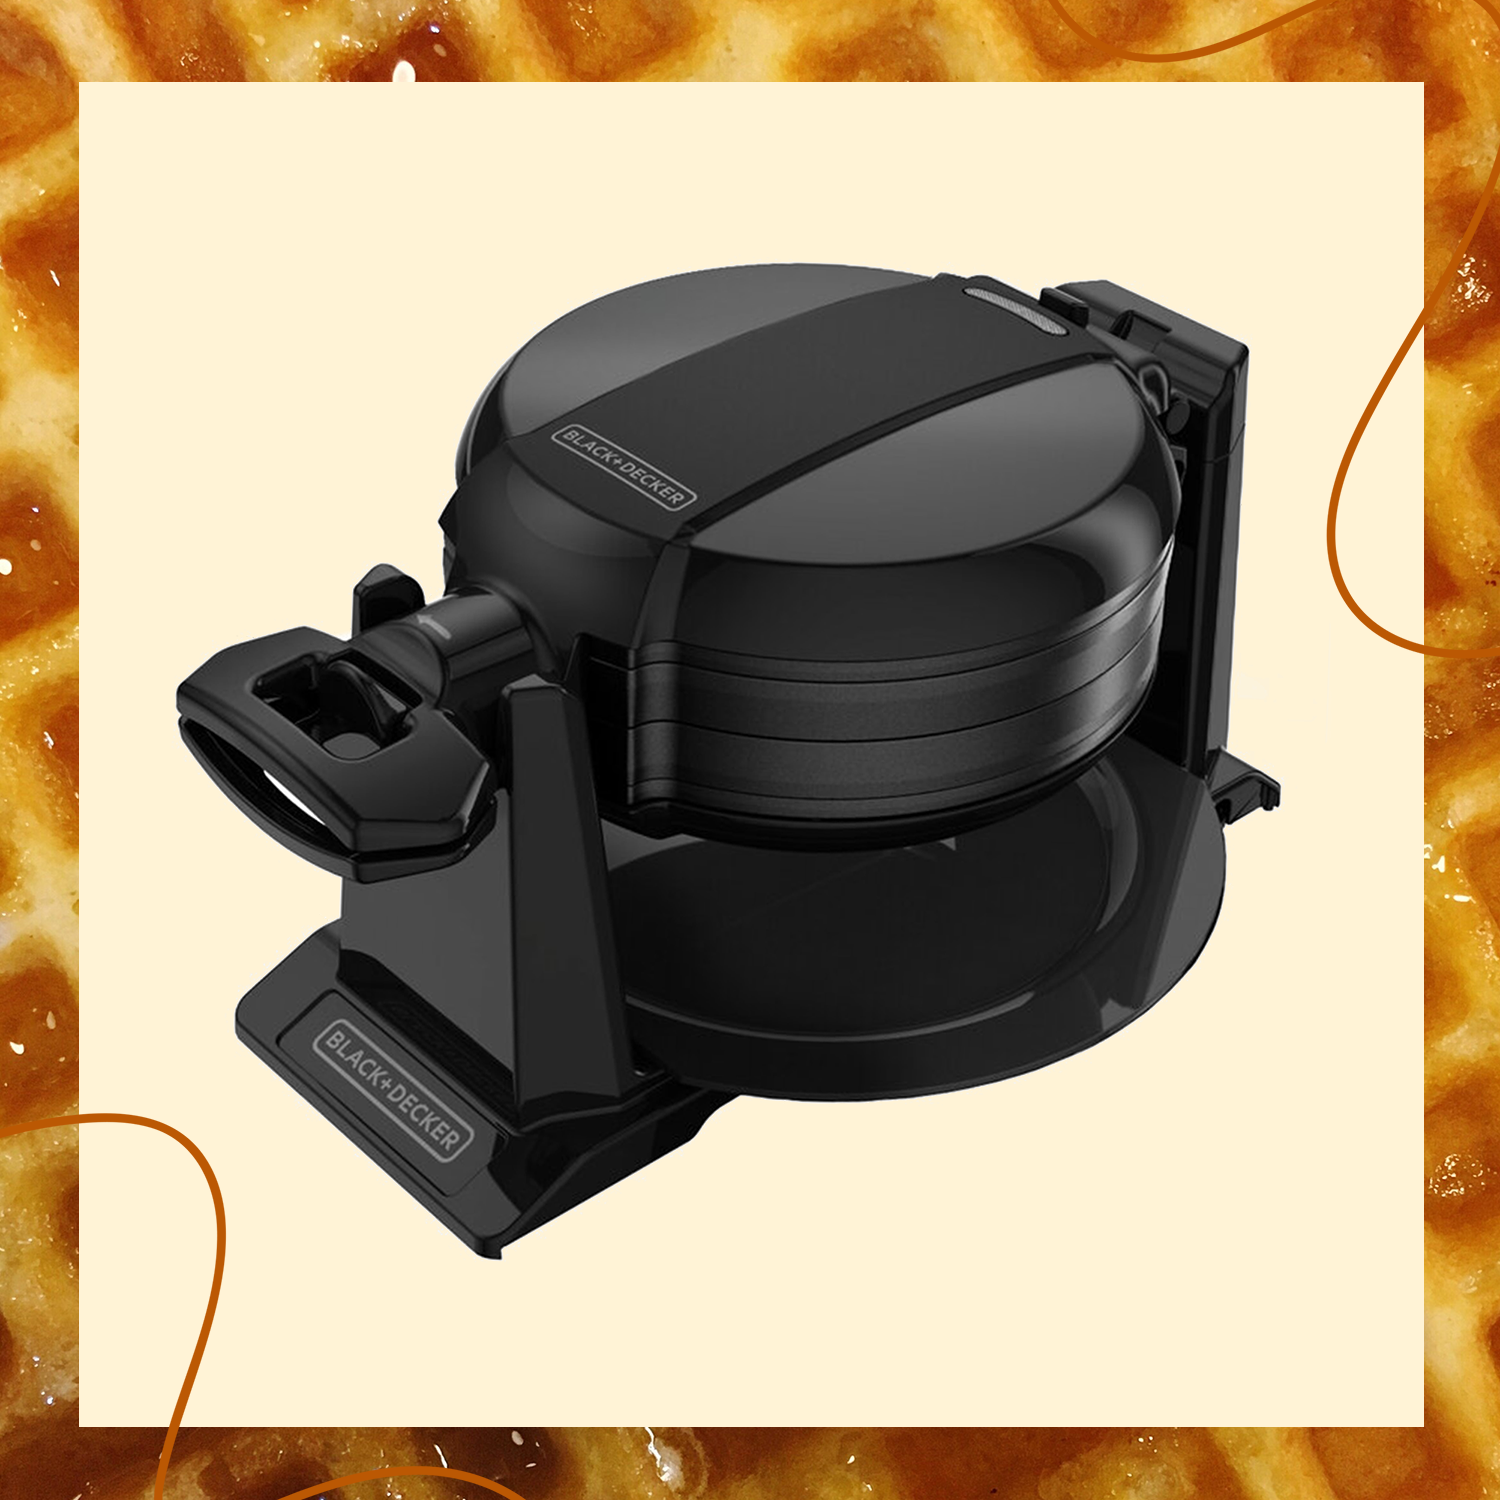 Dash's New Mini Waffle Maker Will Give You a Stack of Spiderwebs